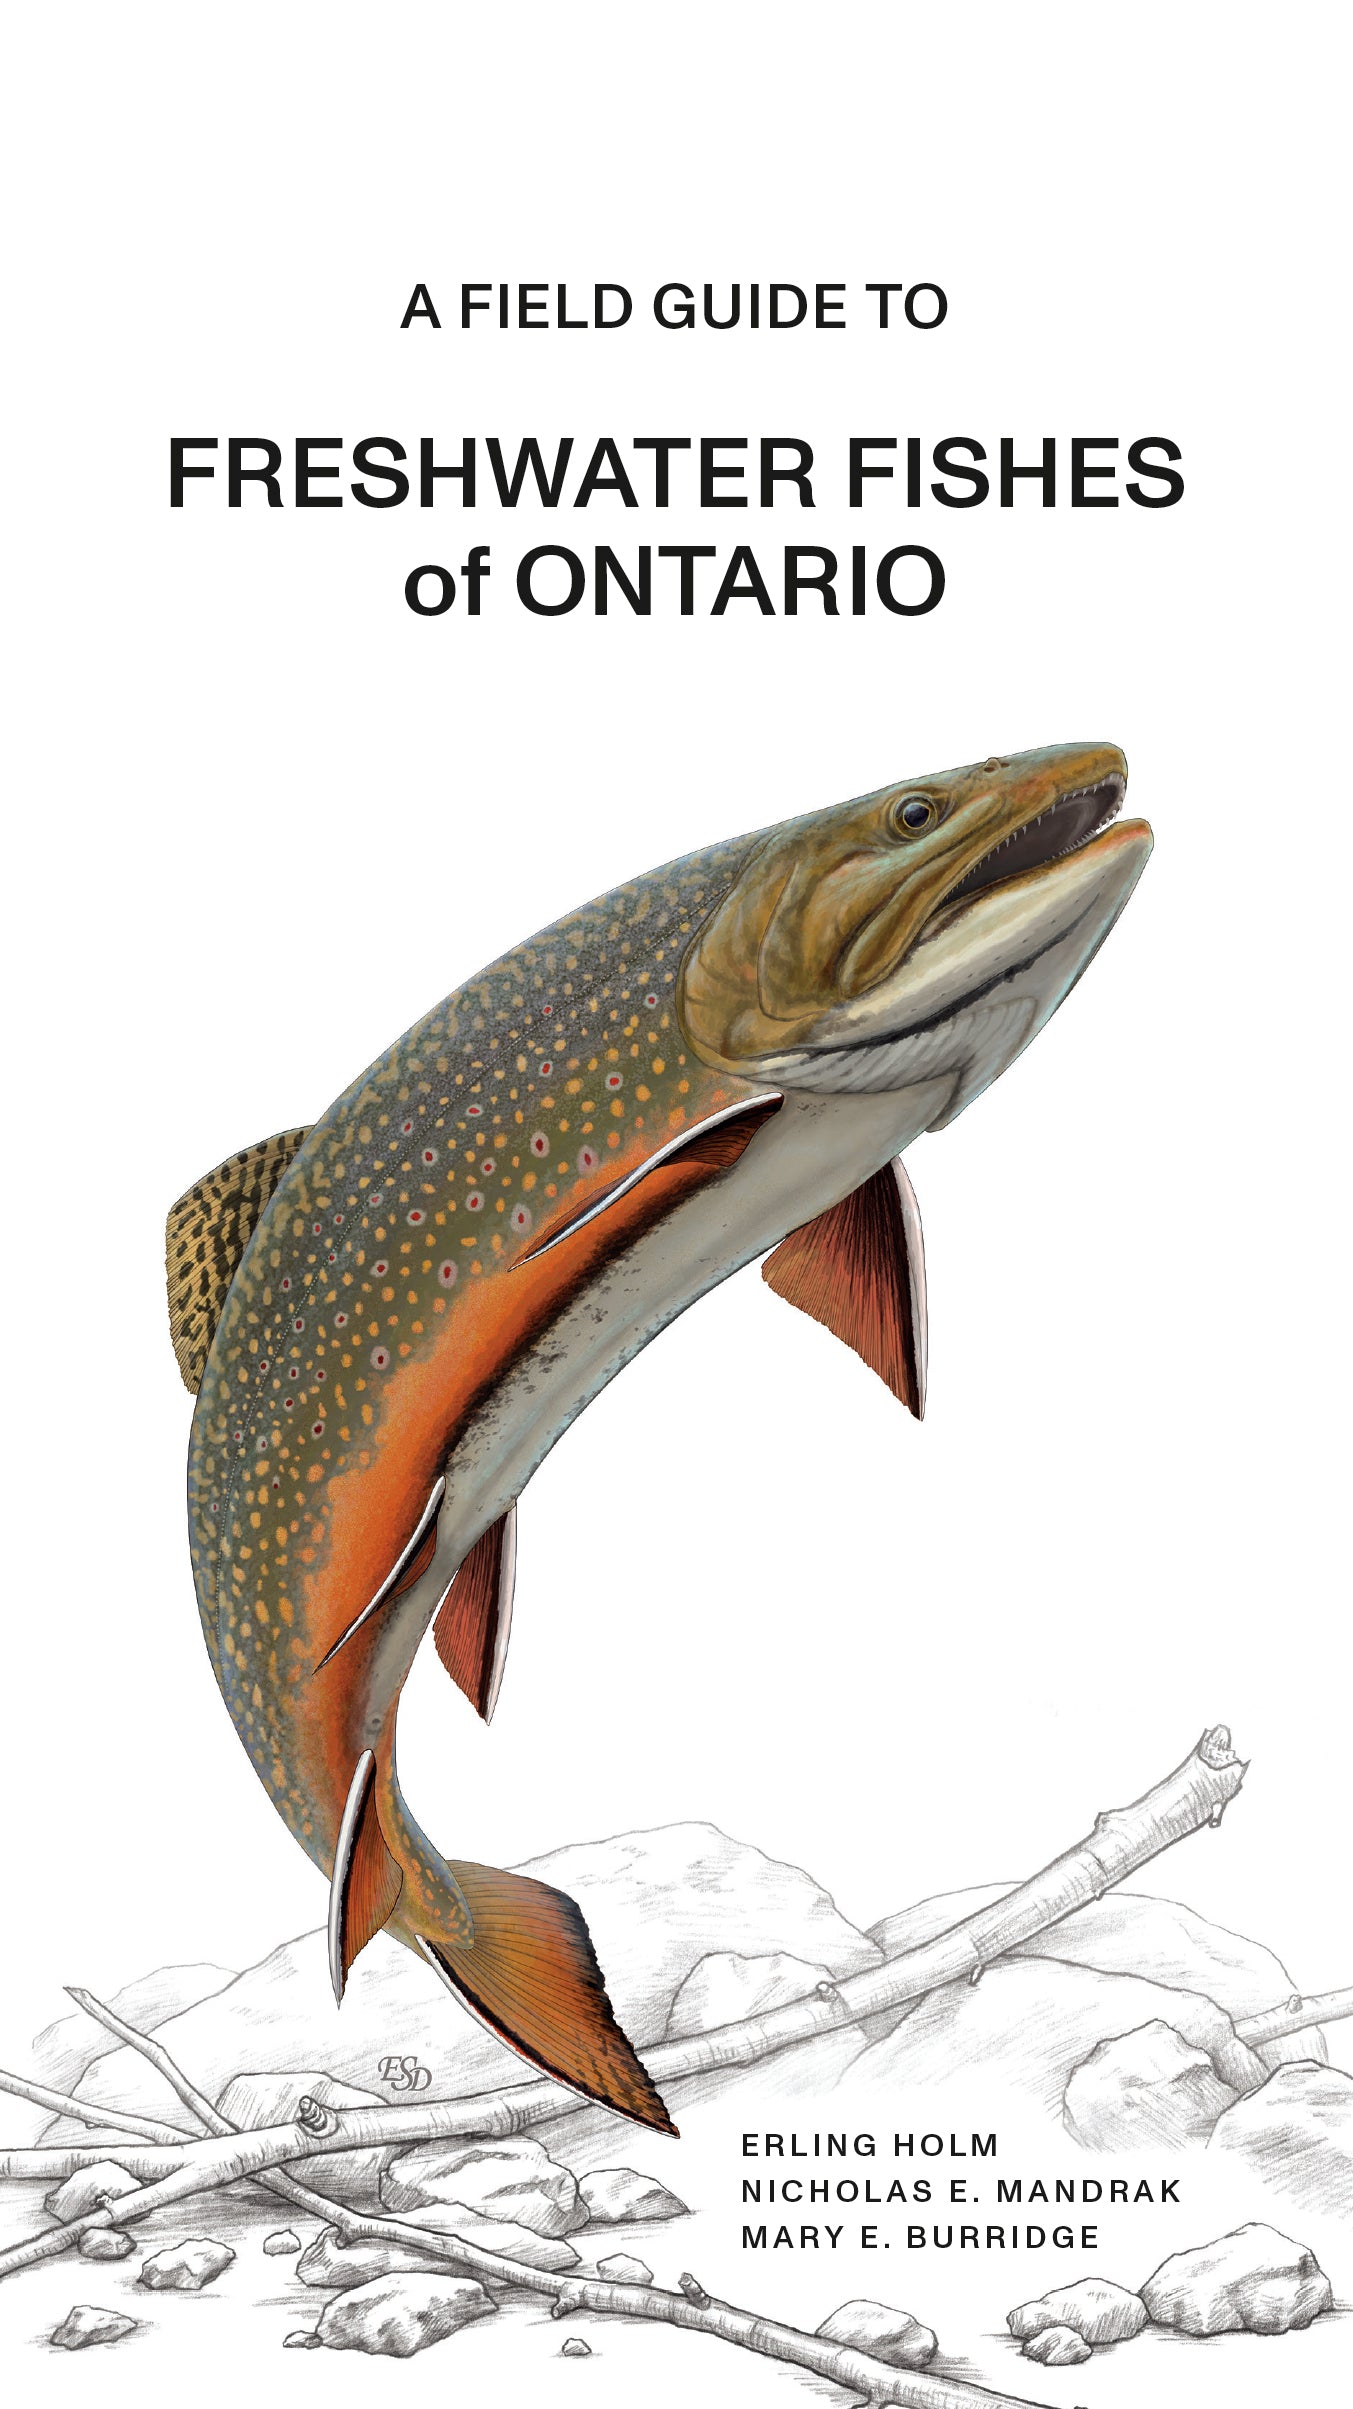 A Field Guide to Freshwater Fishes of Ontario